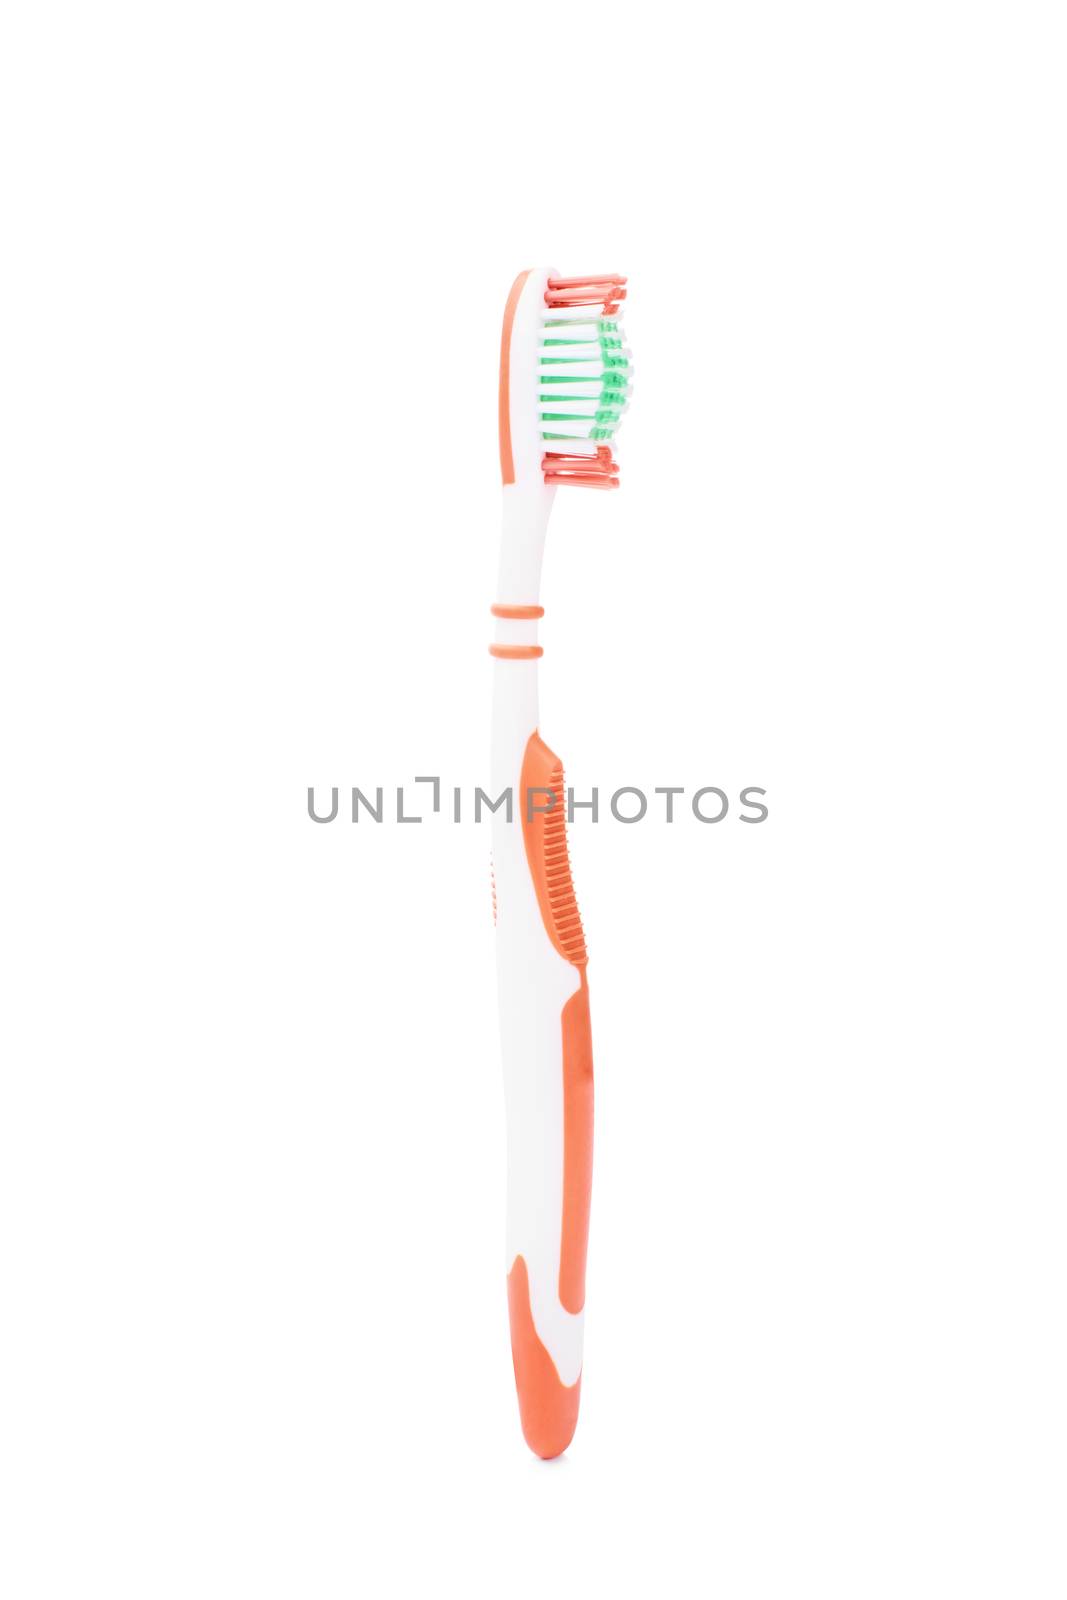 Close-up shot of a vertically placed toothbrush, isolated on white background.